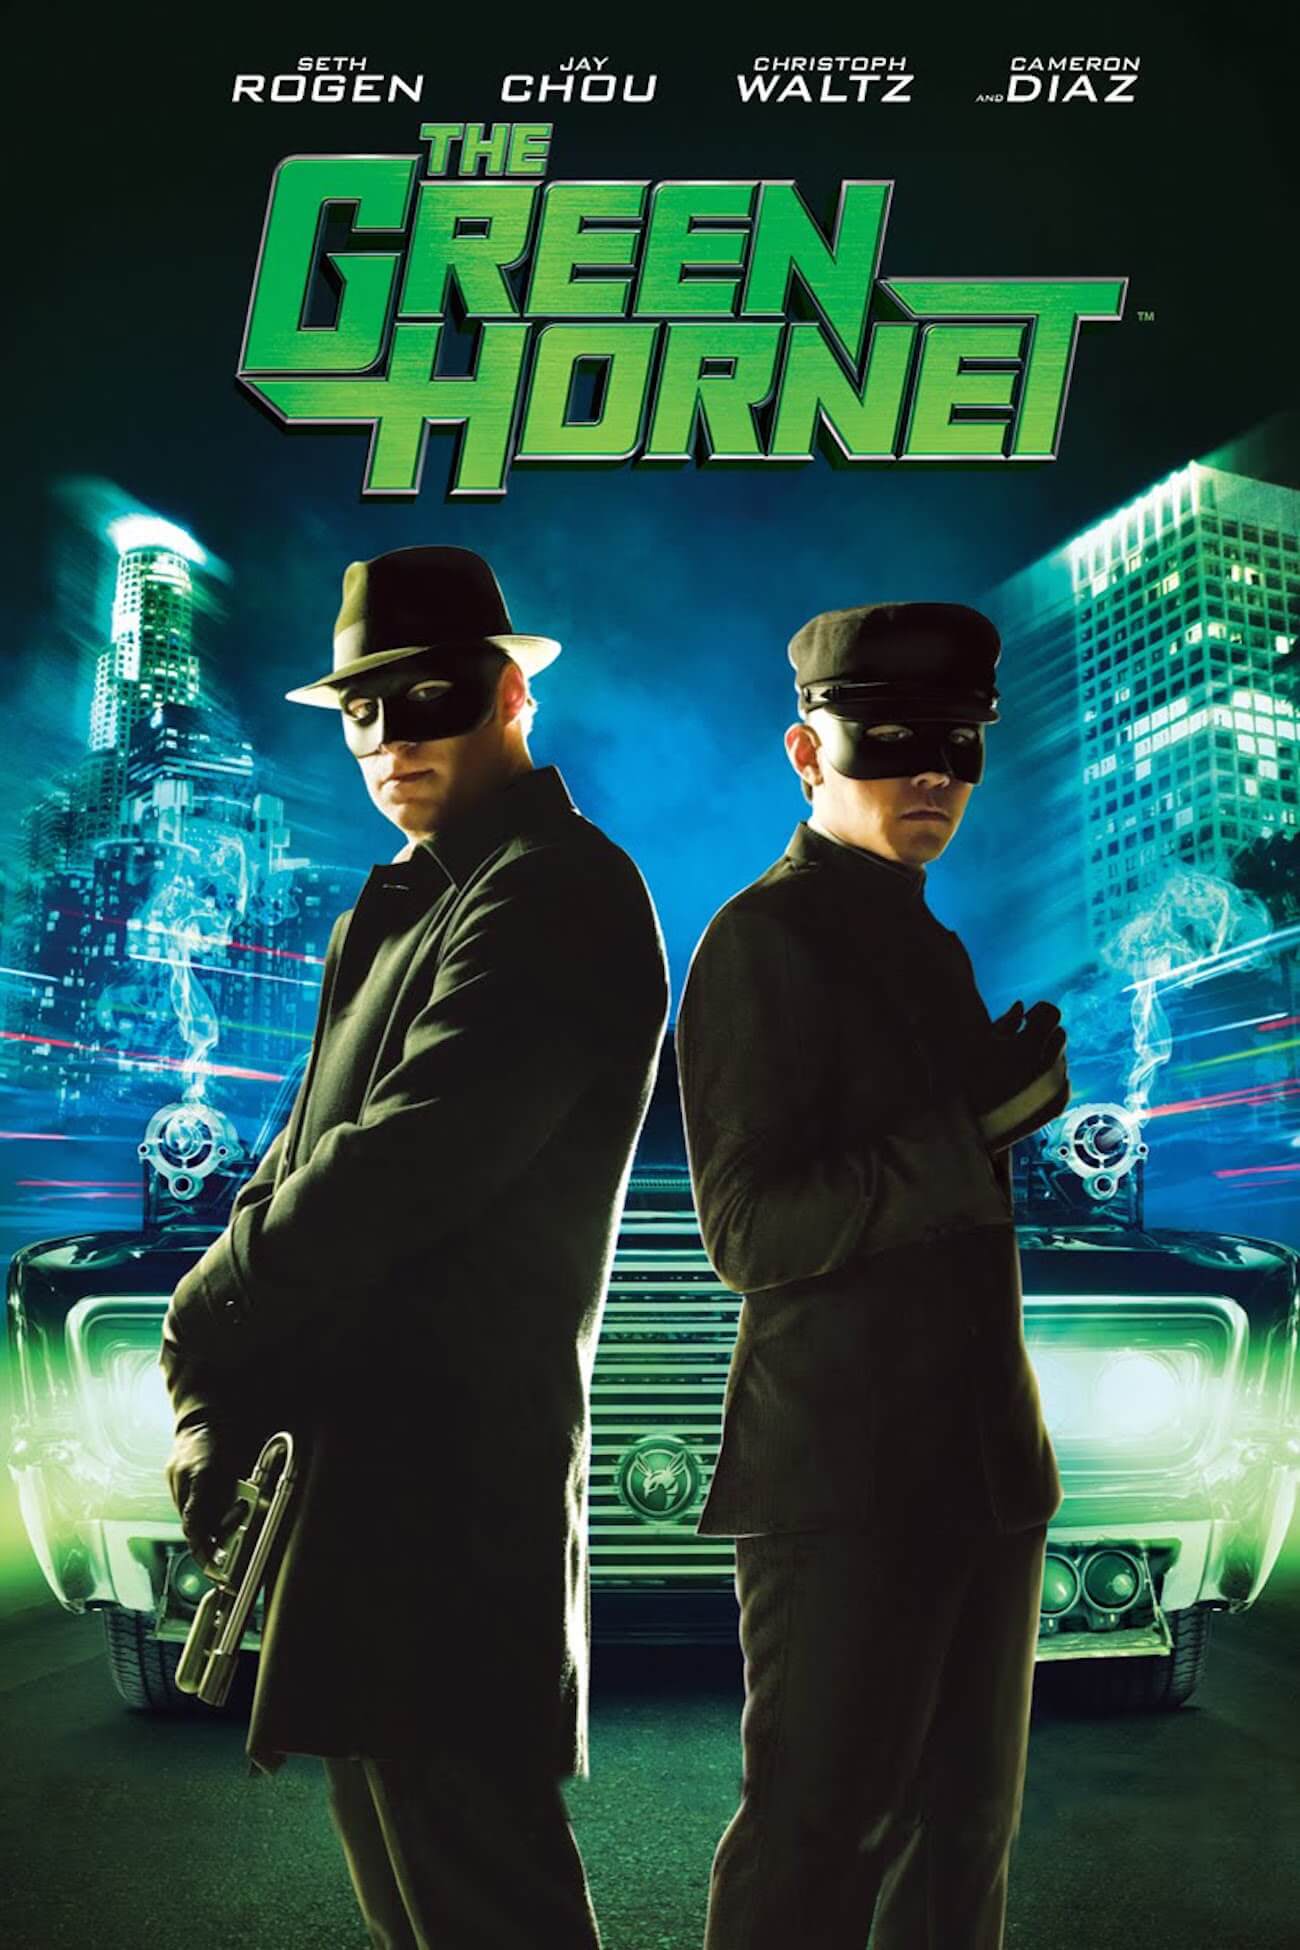 The green hornet official movie poster